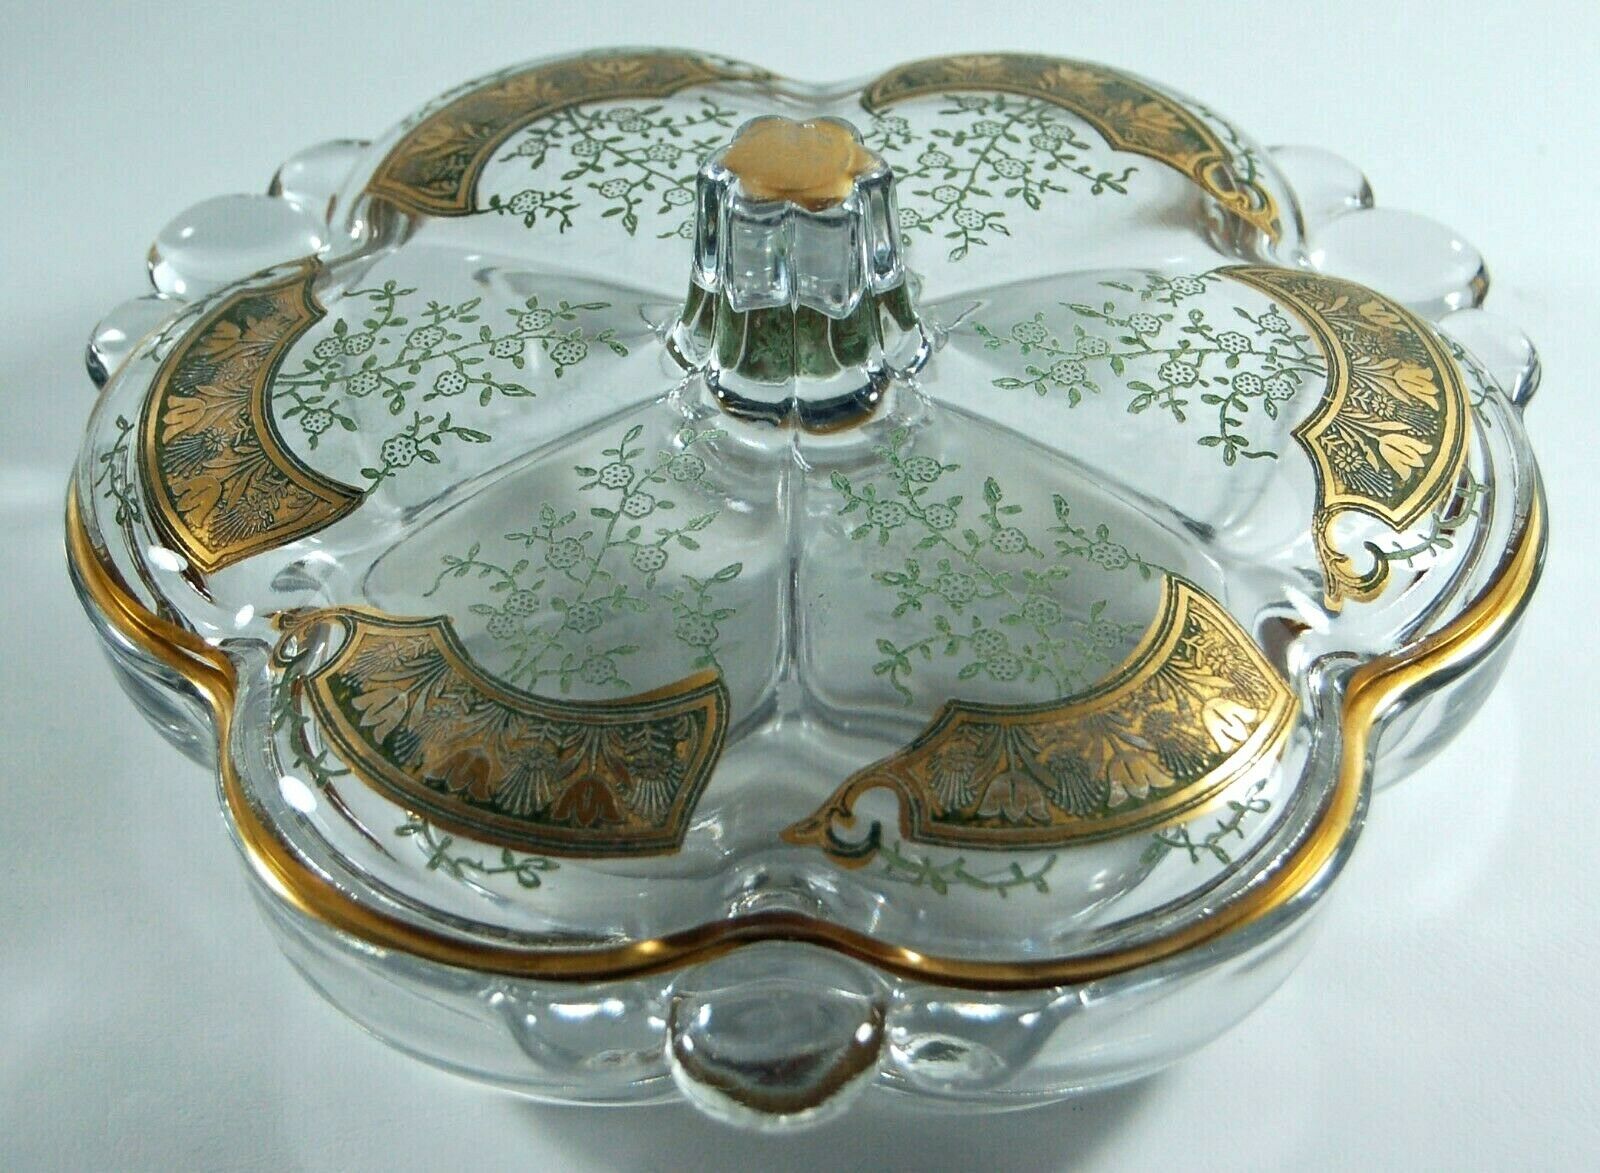 BEAUTIFUL DUNCAN MILLER CANTERBURY COVERED CANDY - GOLD DECORATION - A STUNNER